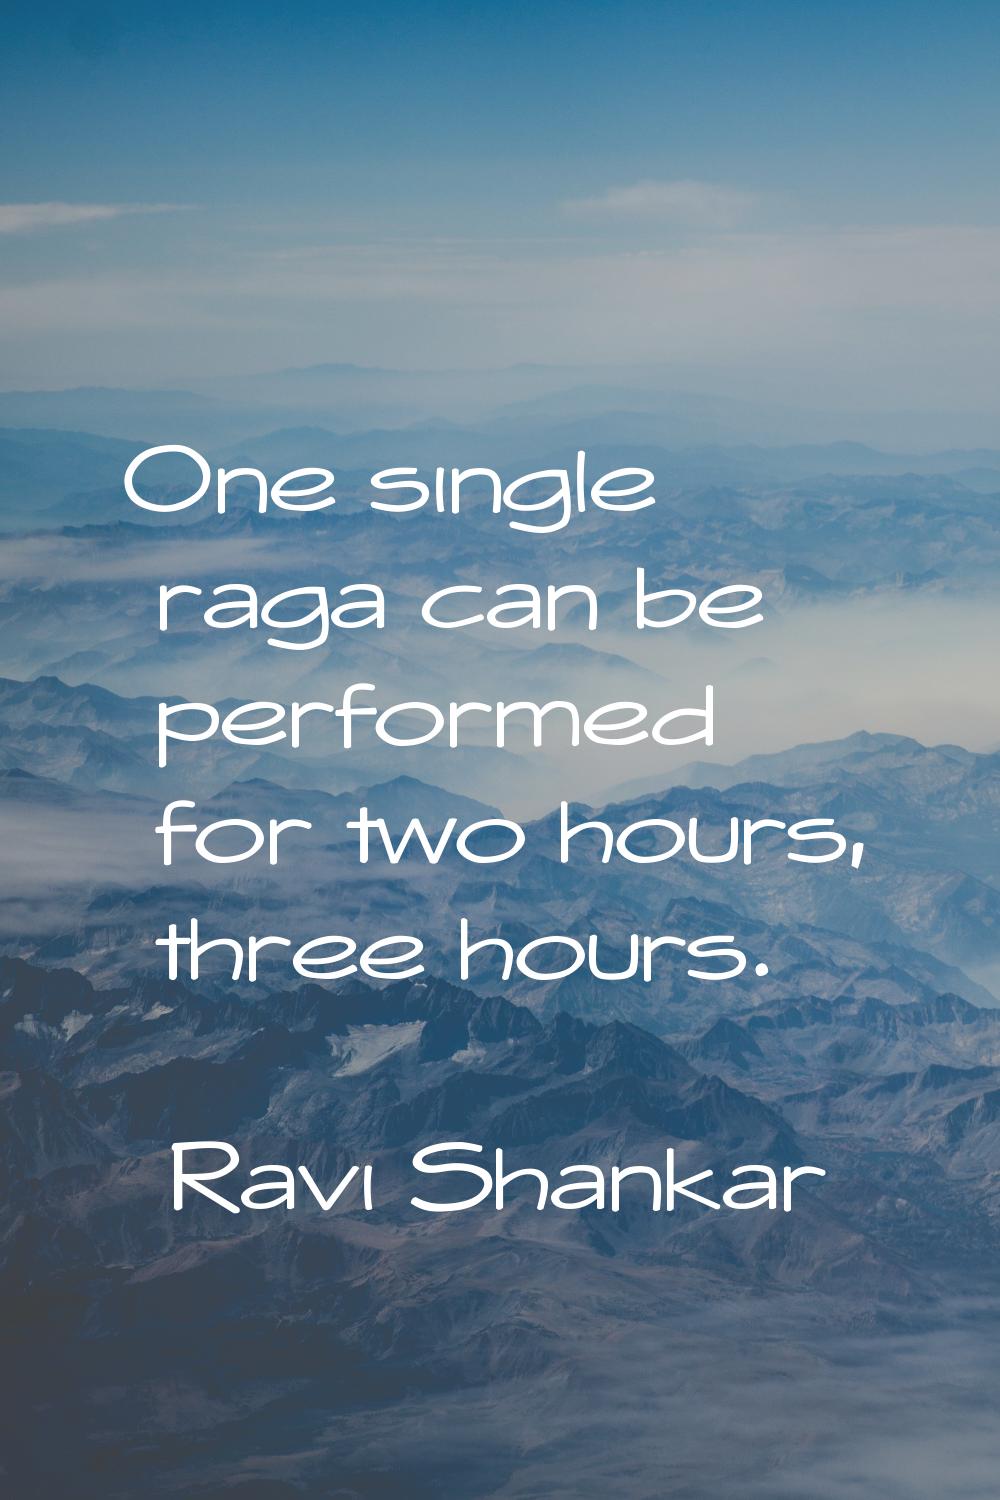 One single raga can be performed for two hours, three hours.